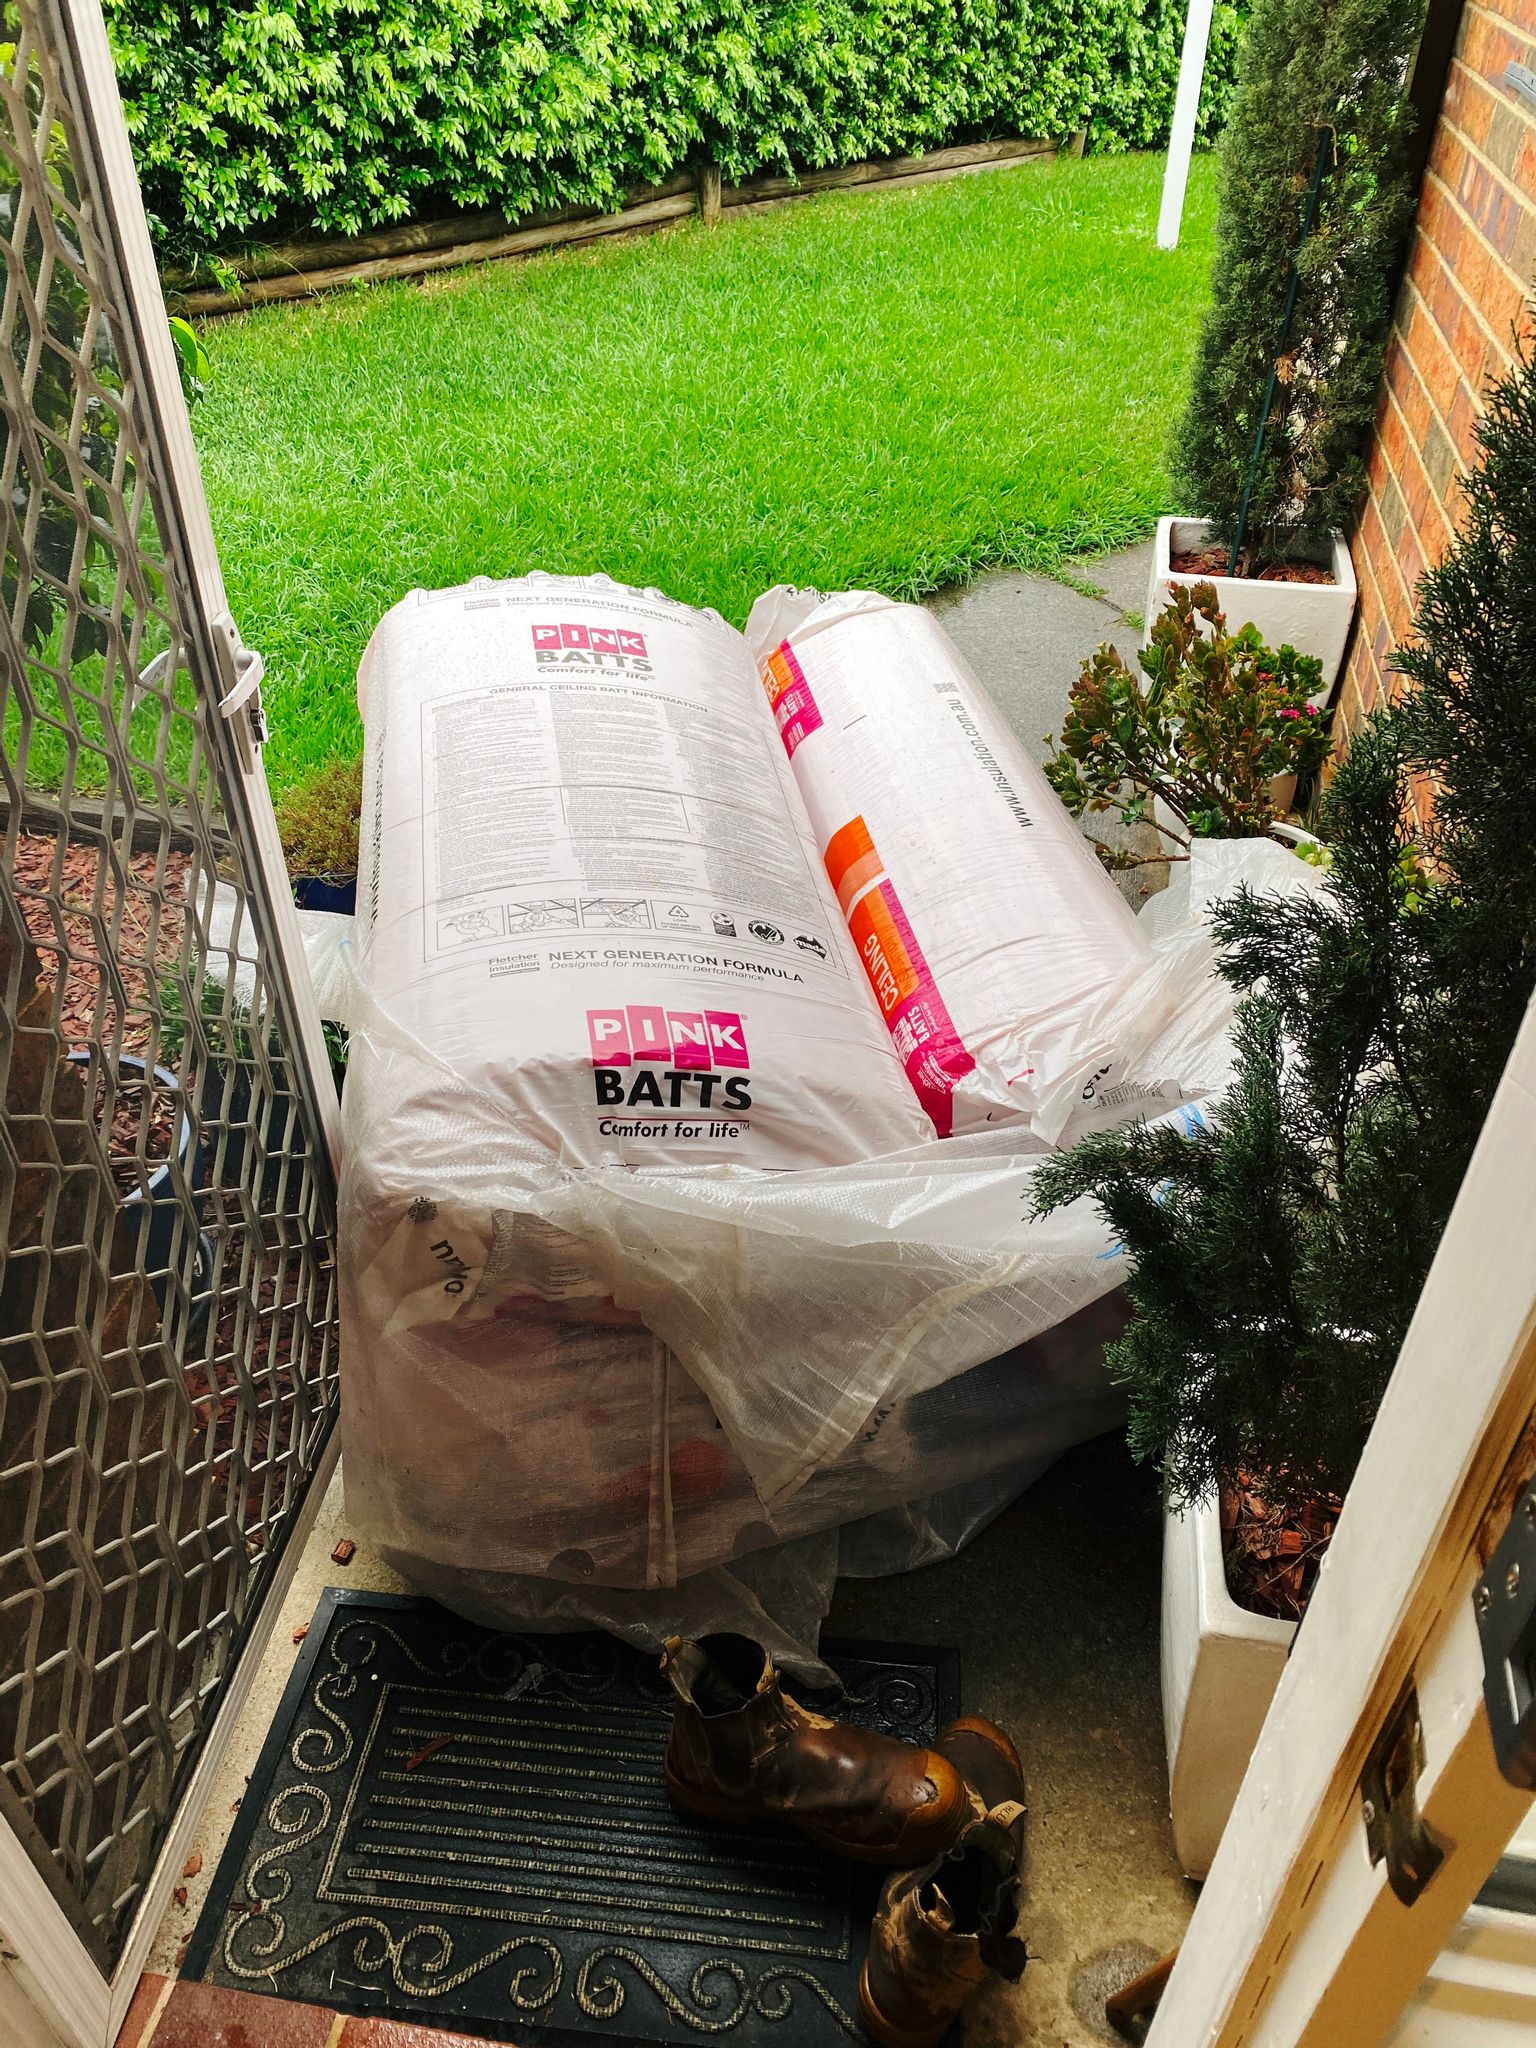 A photo of two large bags of "Pink Batts" ceiling insulation.